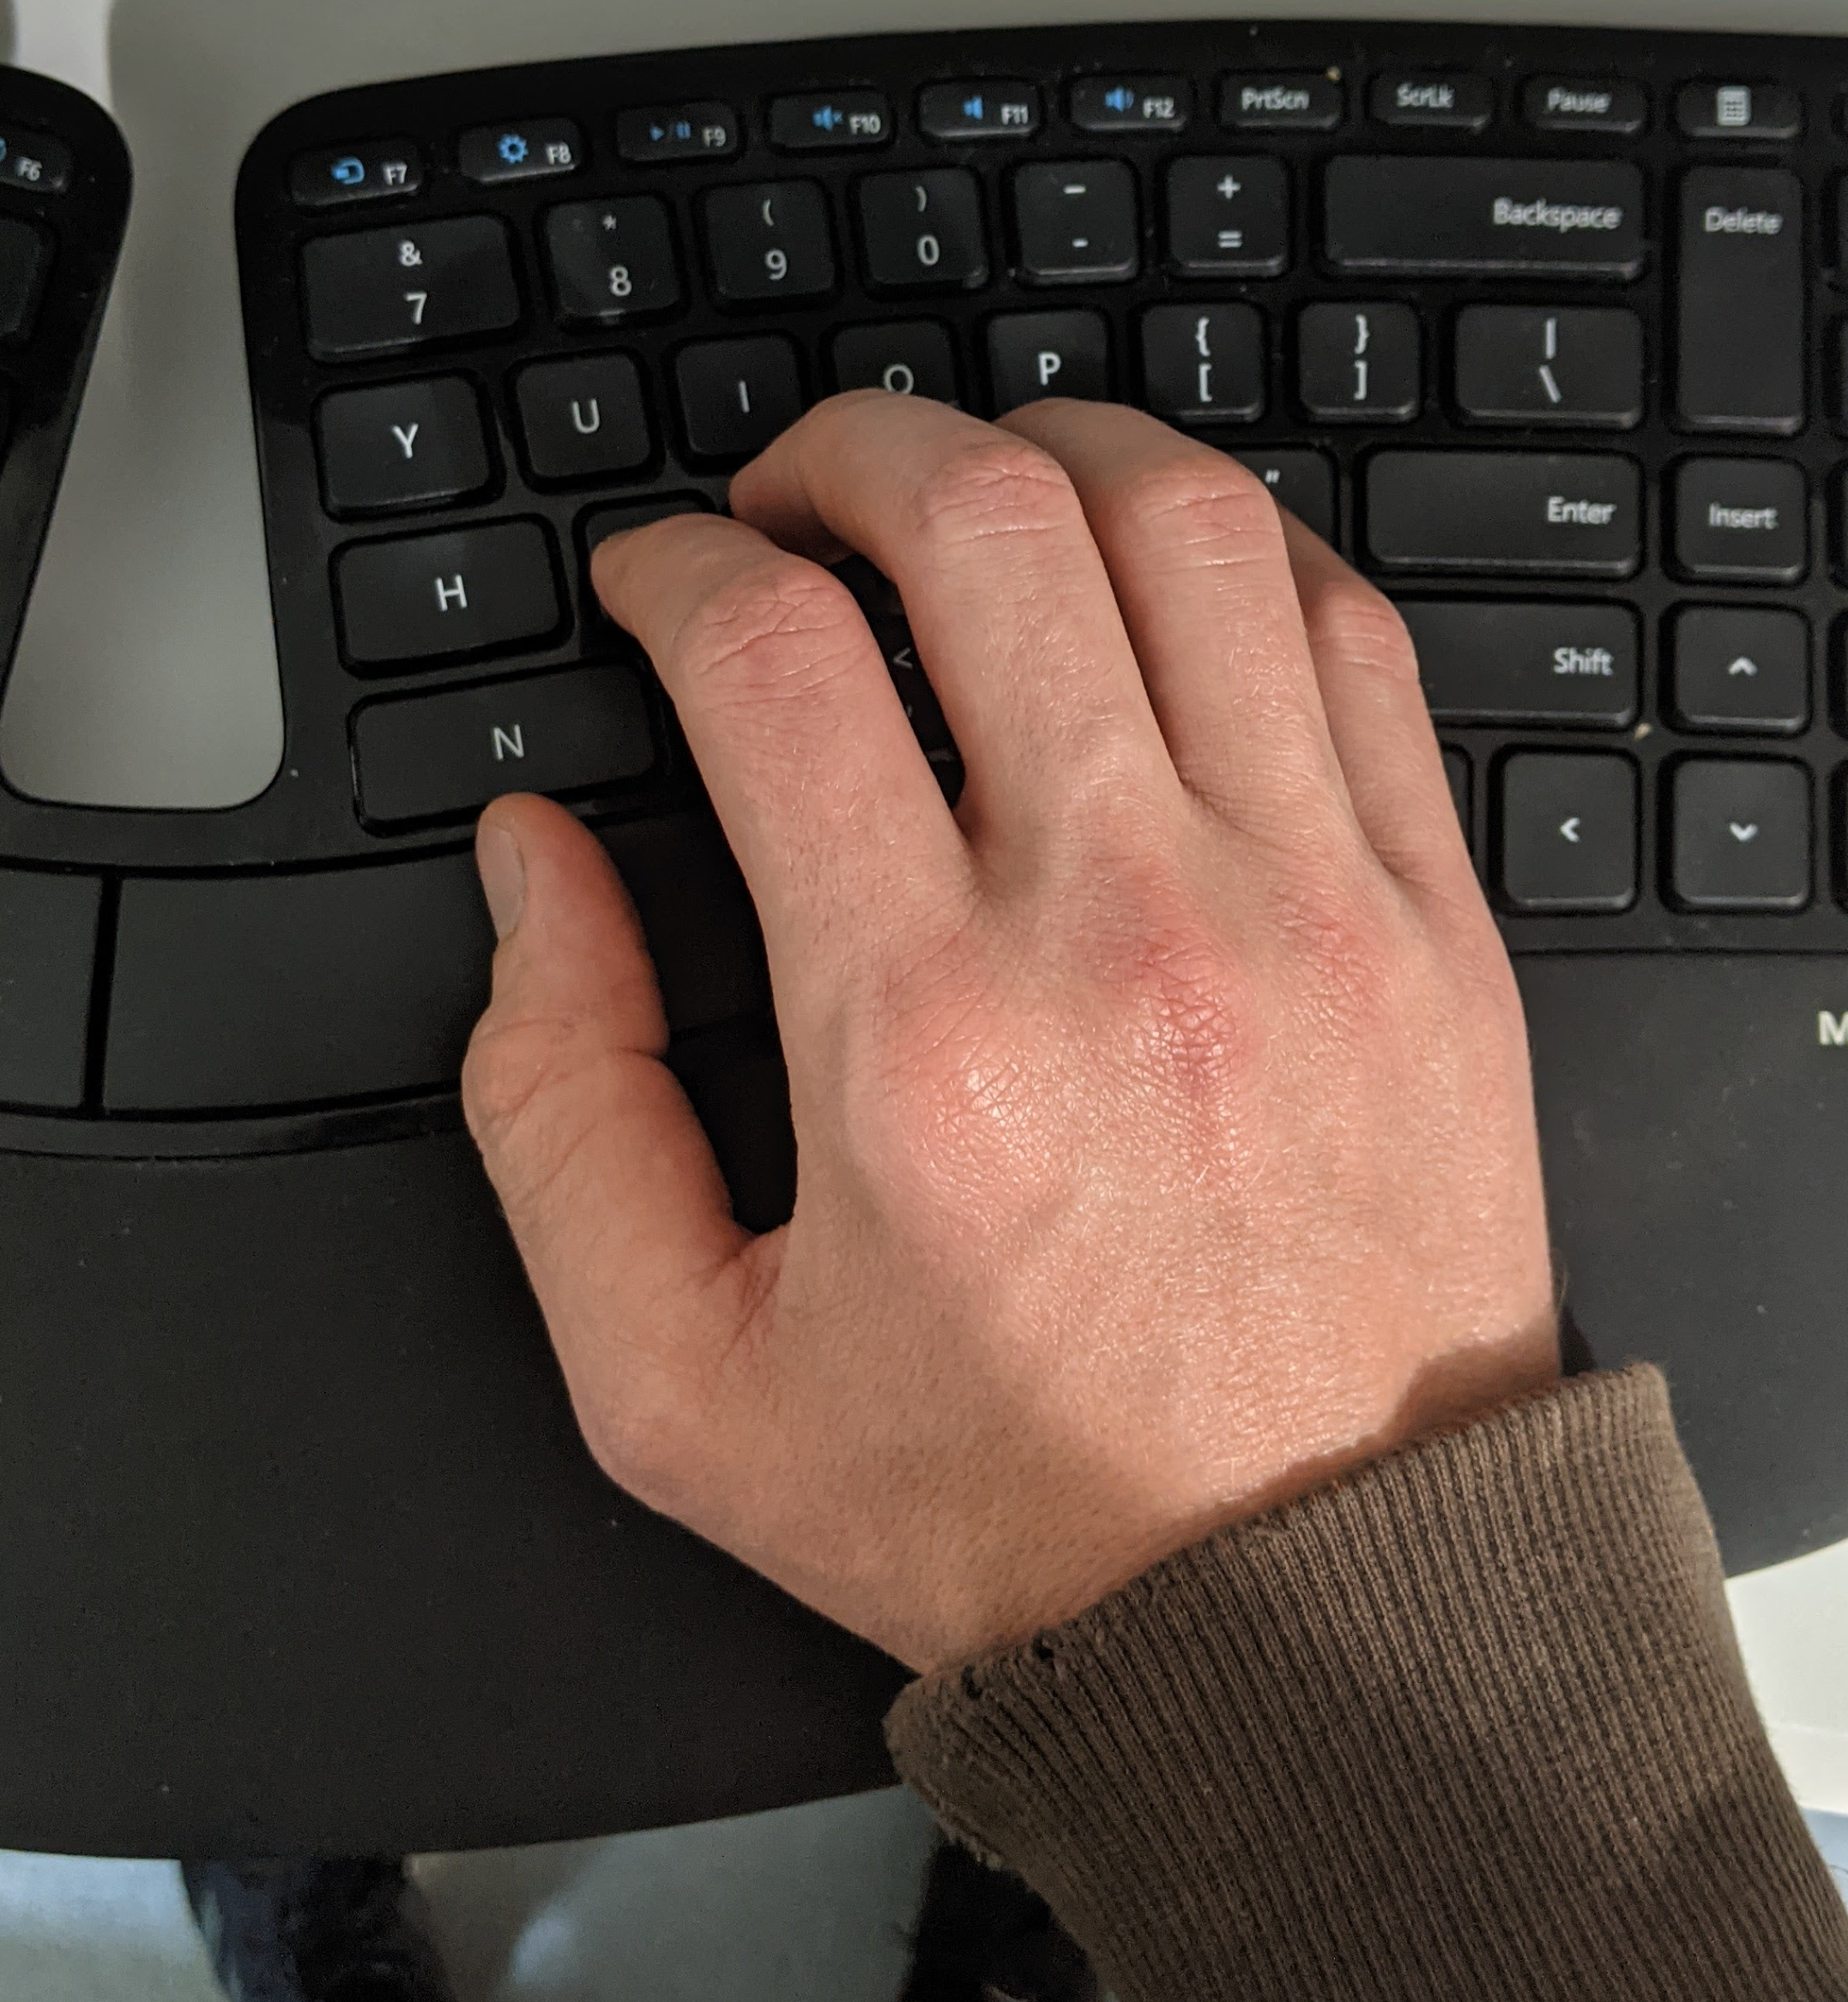 My hand in my natural typing position on the Microsoft Sculpt